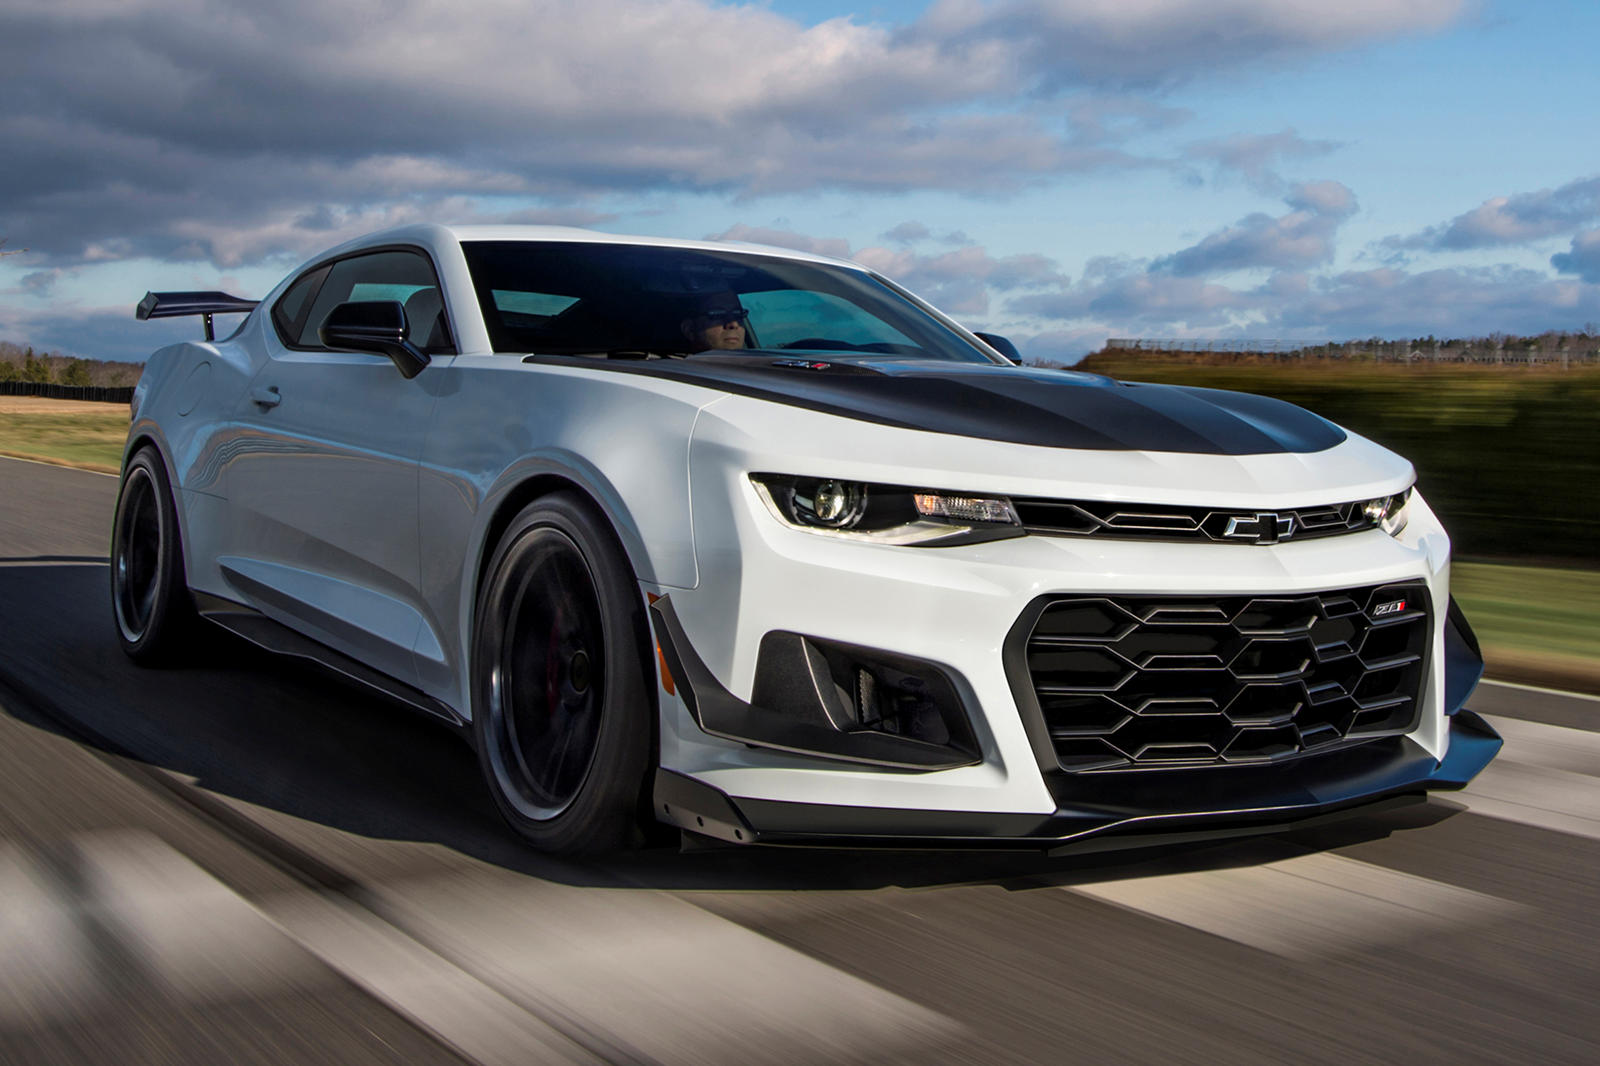 2019 Chevrolet Camaro ZL1 1LE Arrives With New 10Speed Auto CarBuzz